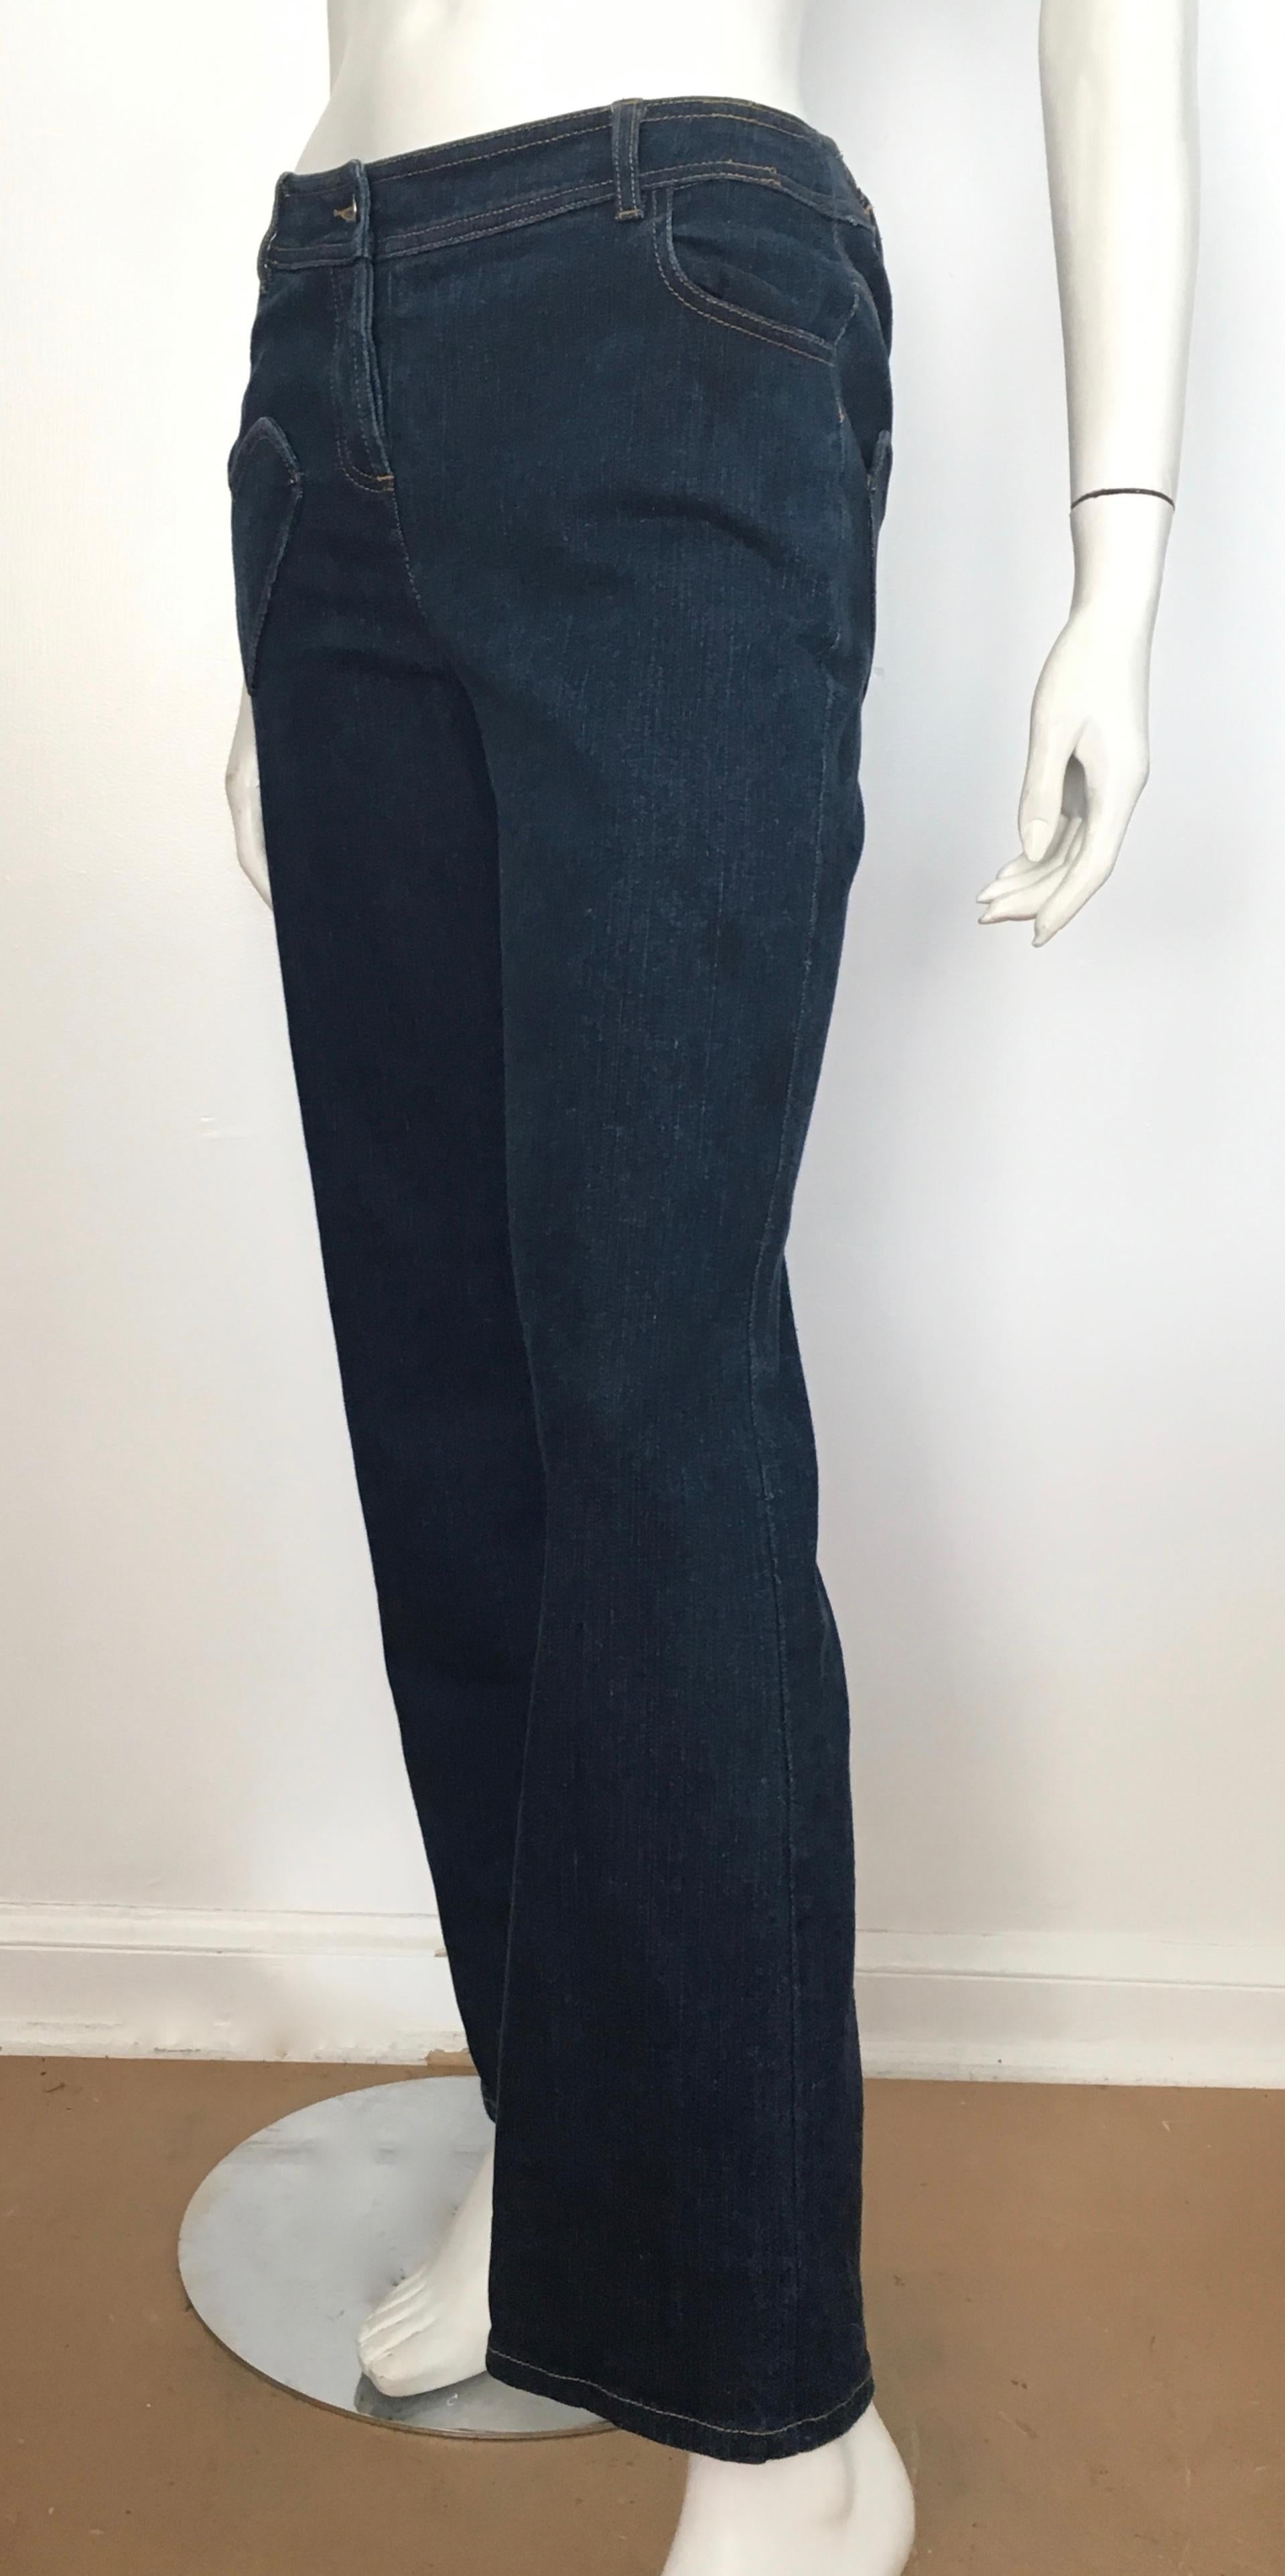 Dior Denim Button Up Jeans with Heart Shape Pockets Size 6.  6